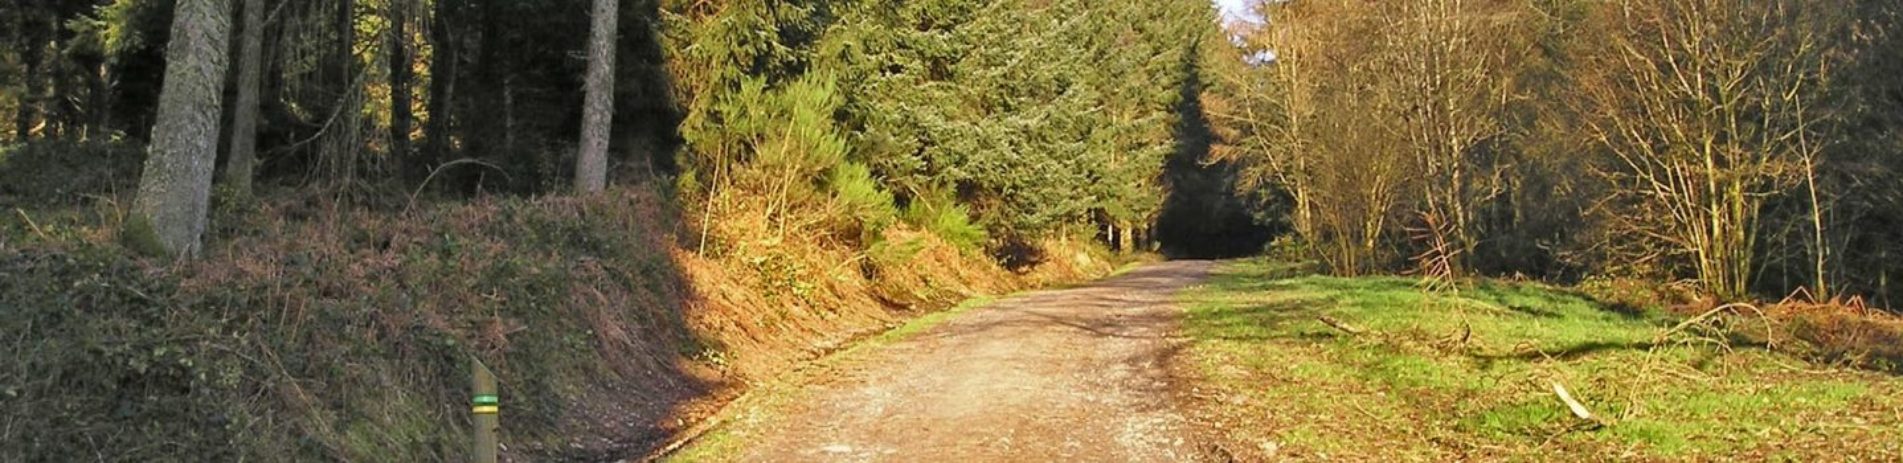 forest-track-in-sunshine-with-fir-trees-visible-in-the-background